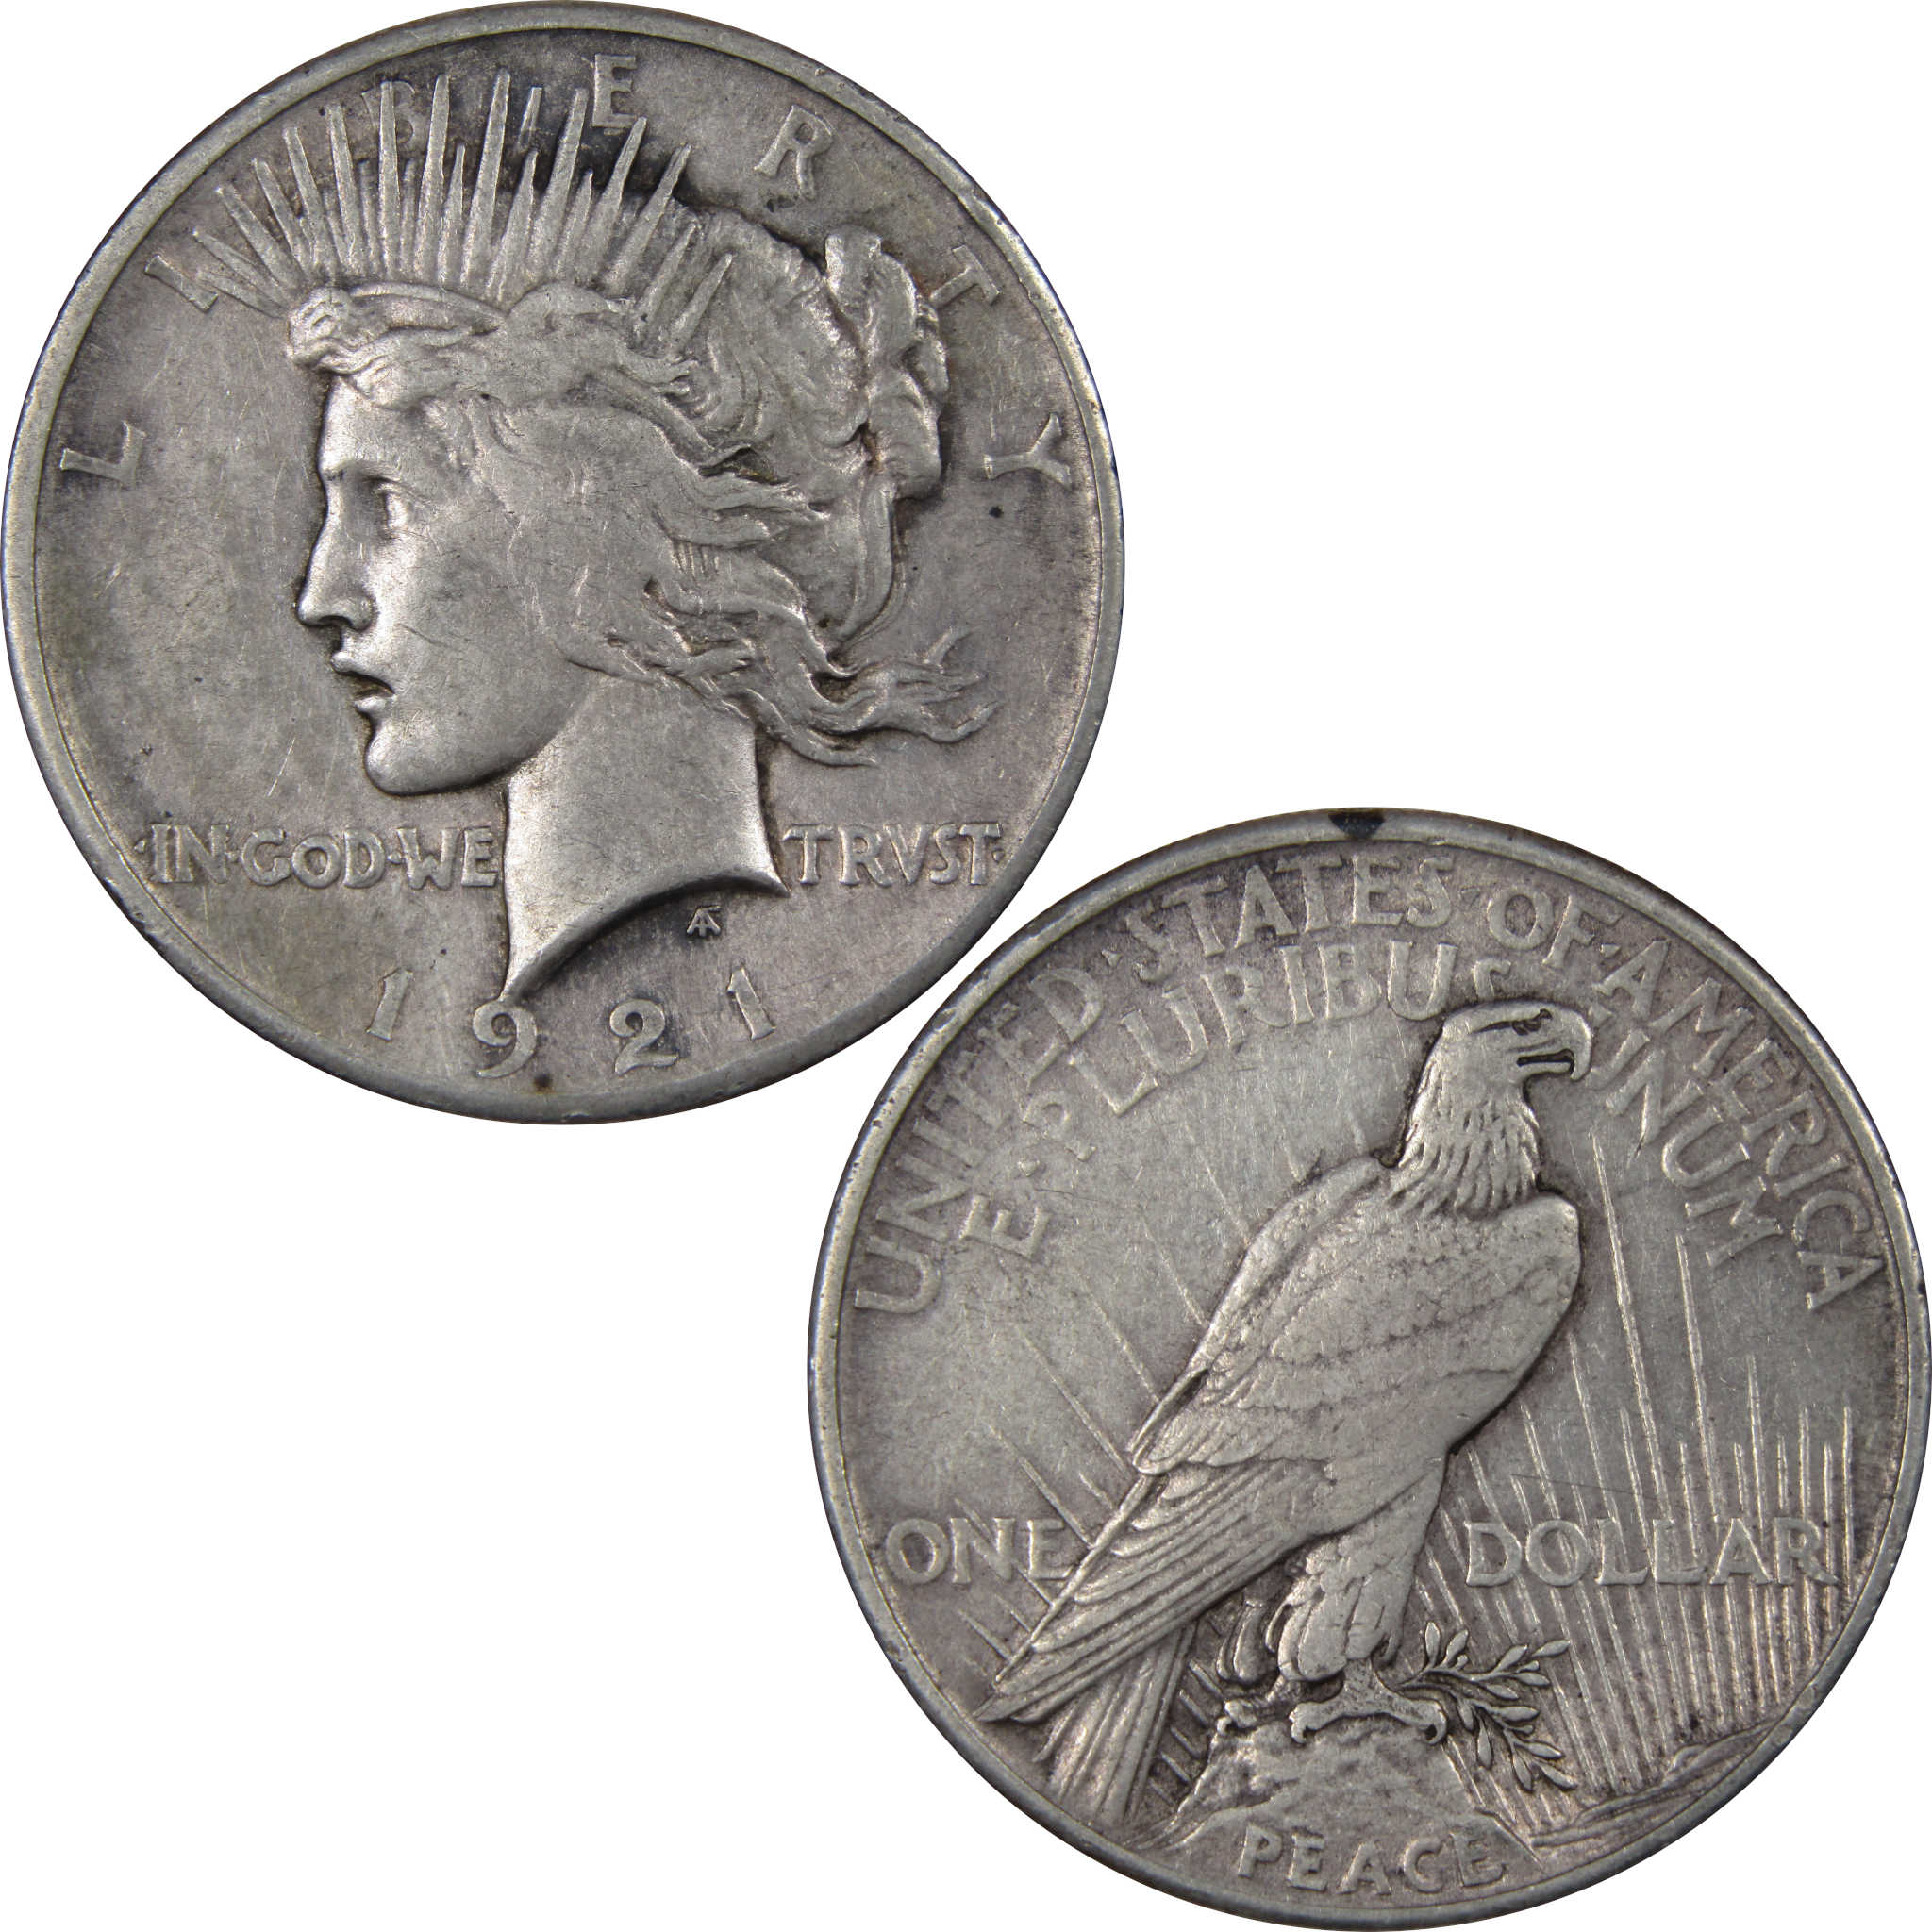 United States Peace silver dollar coin - Exchange yours for cash today